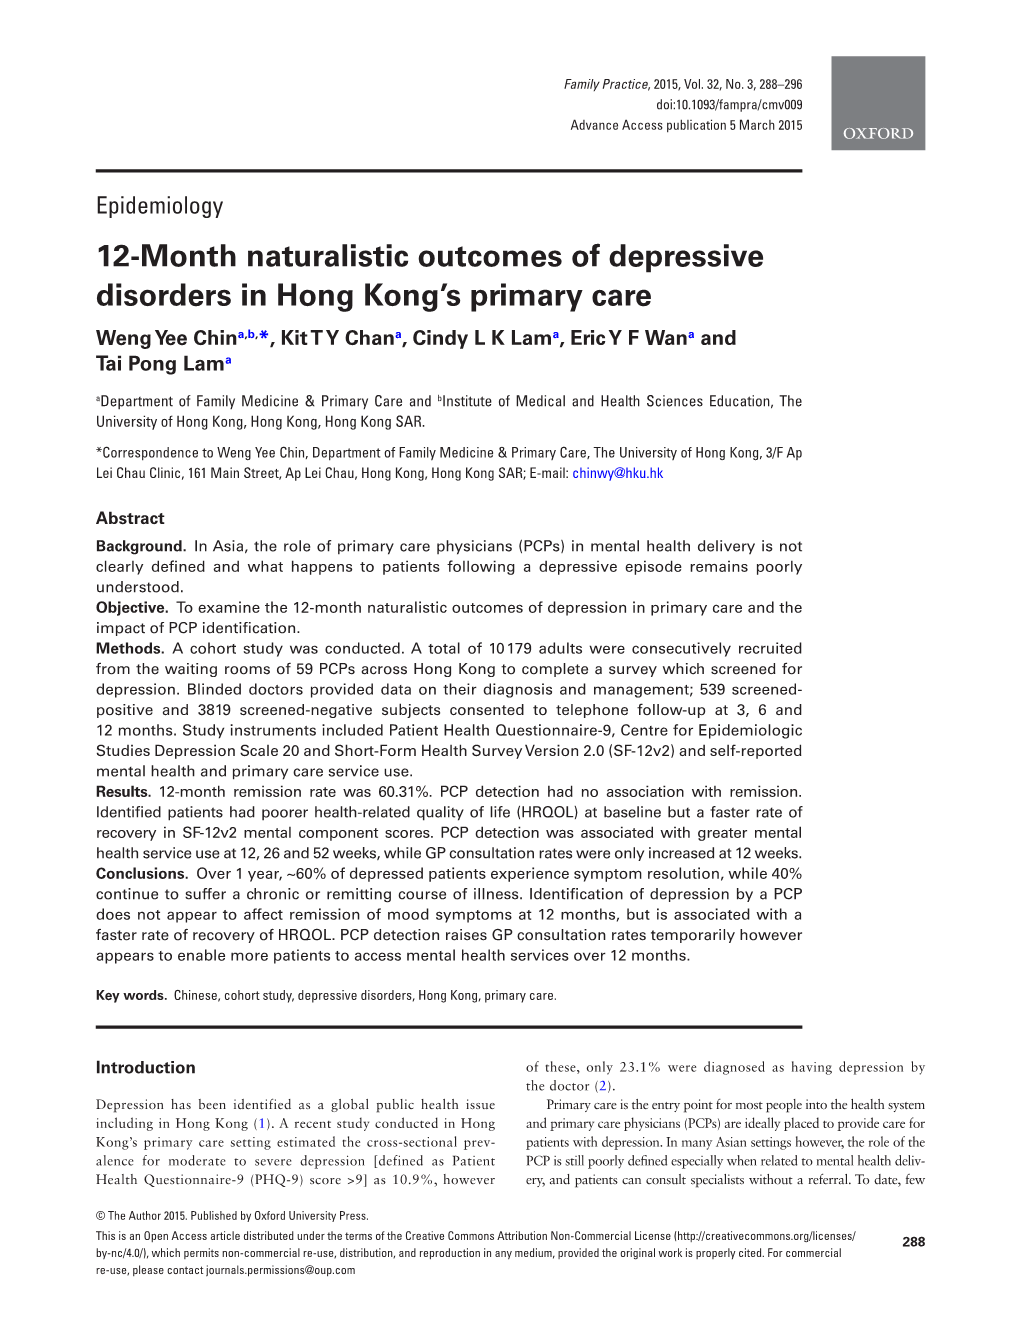 12-Month Naturalistic Outcomes of Depressive Disorders in Hong